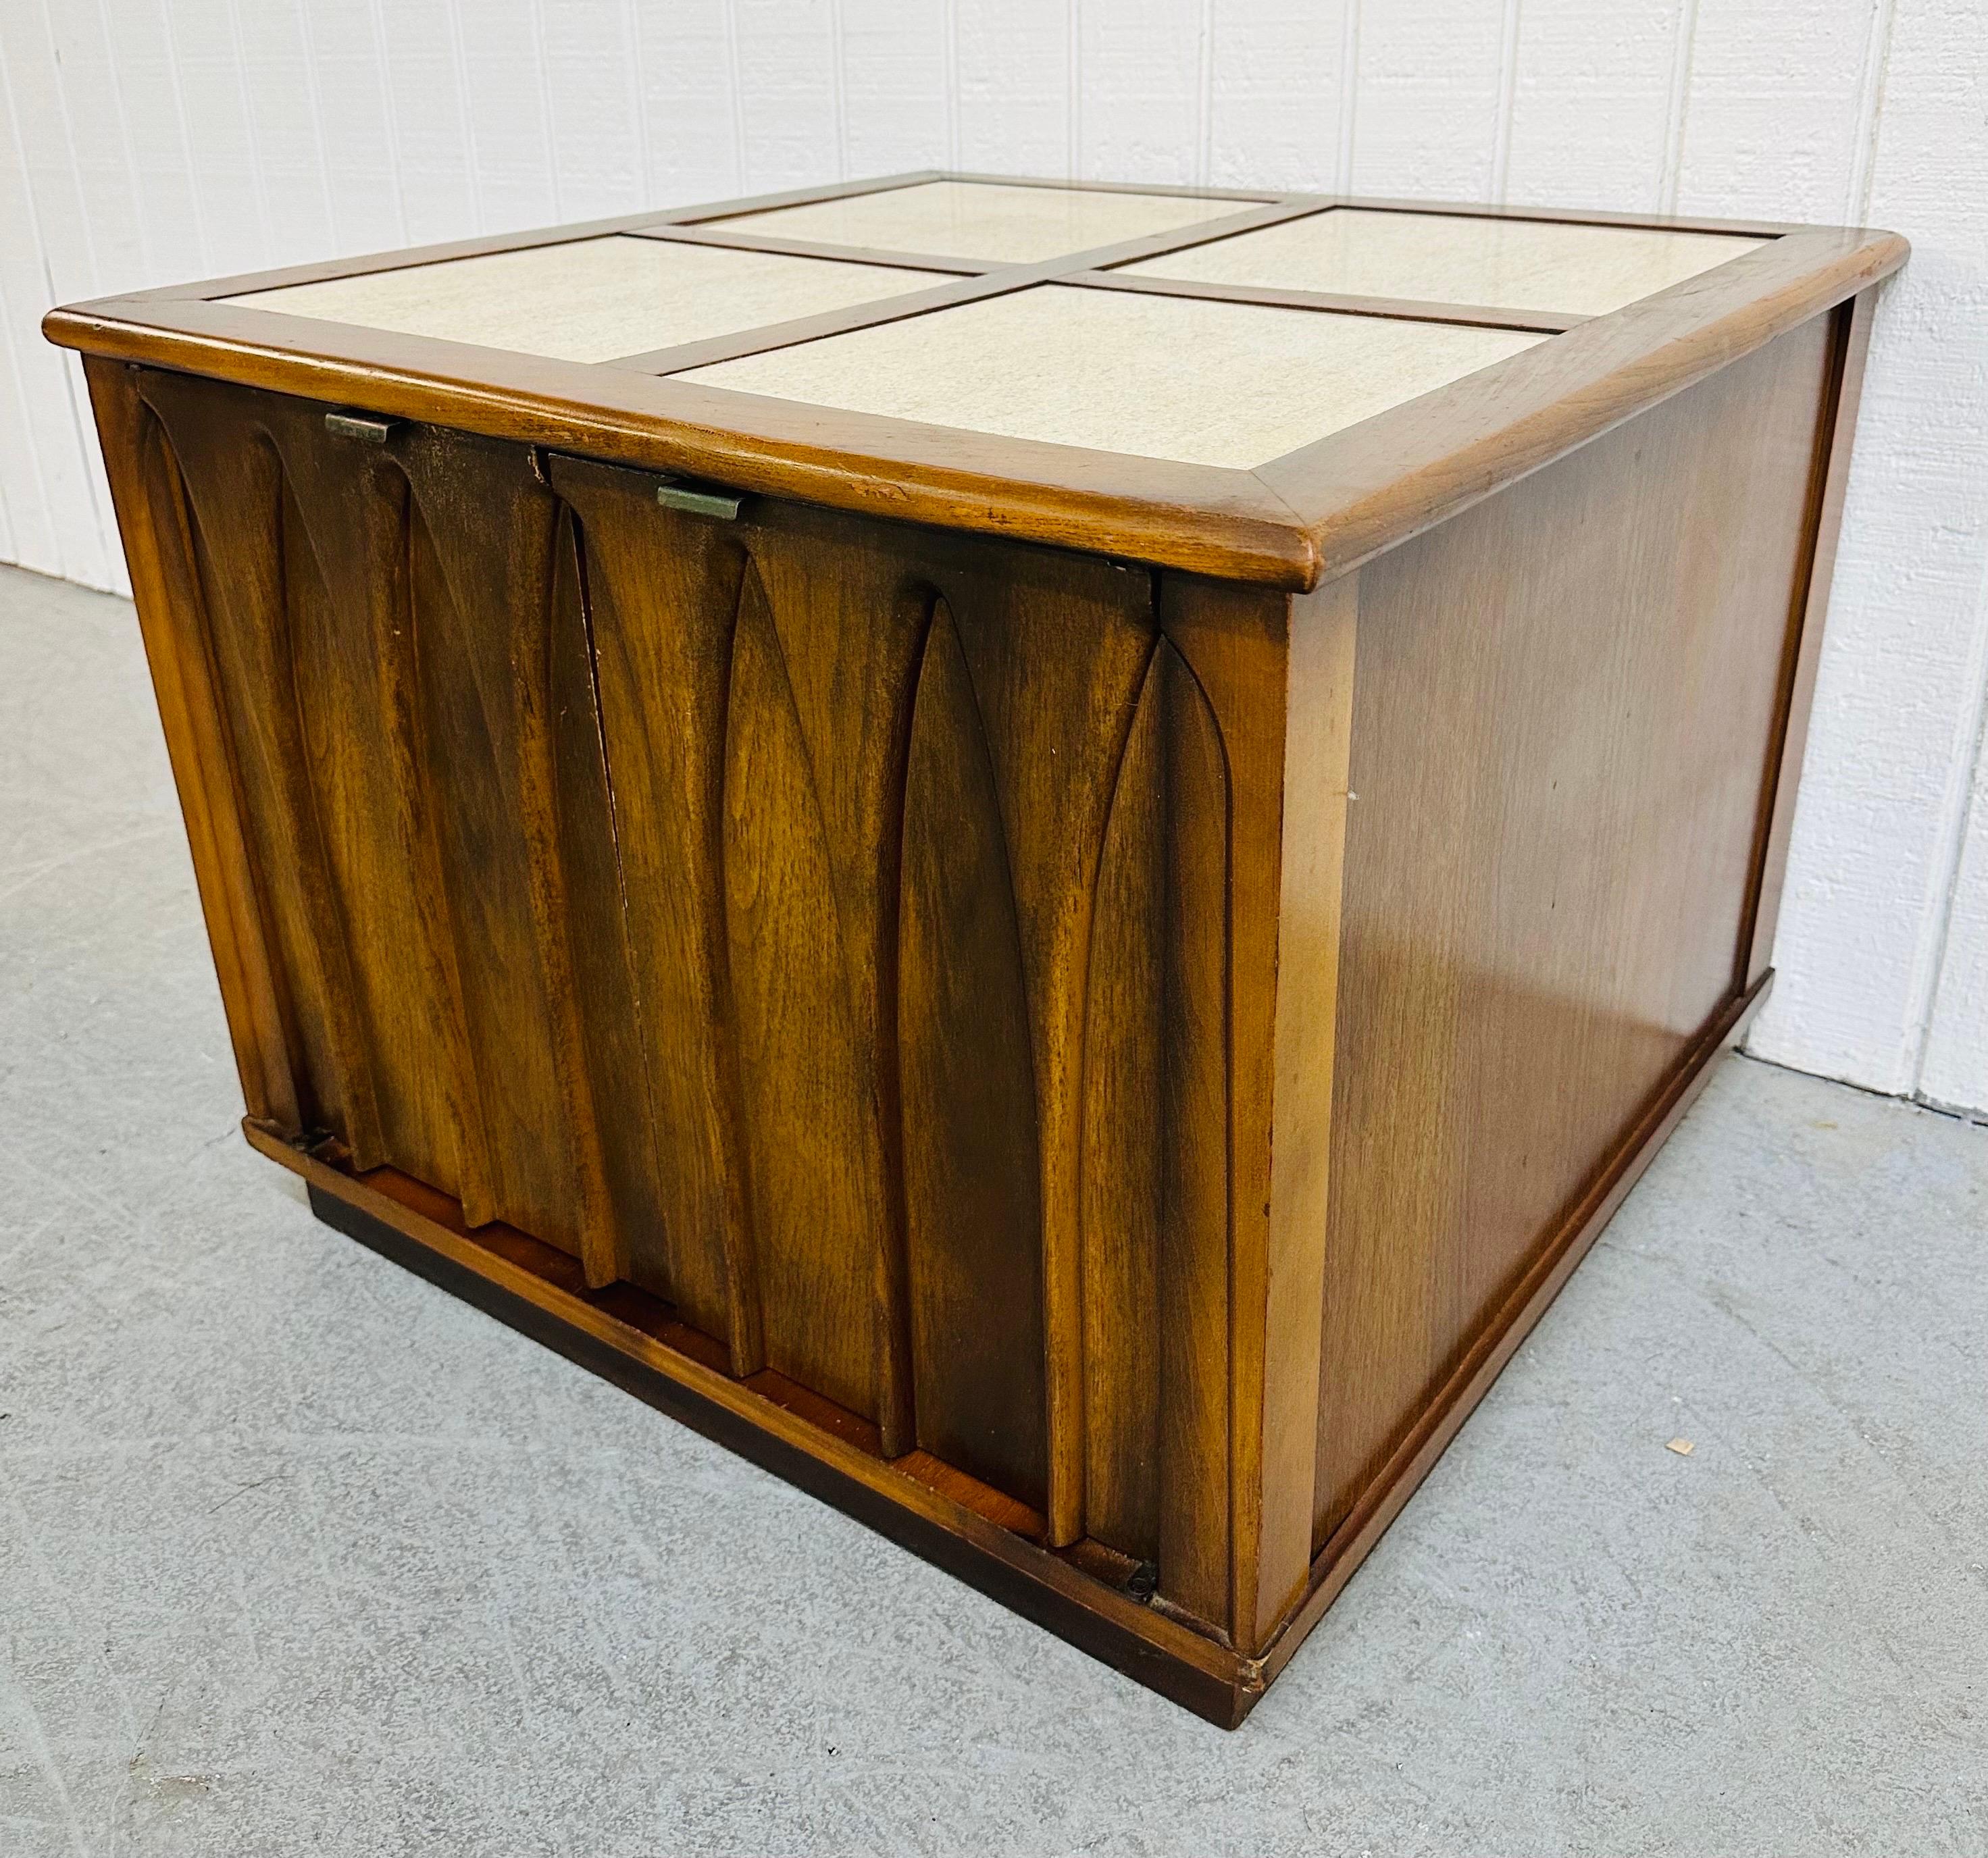 This listing is for a Mid-Century Modern Brasilia Style Walnut & Travertine Side Table. Featuring a straight line rectangular design, four travertine inserts on the top, two doors that open up to storage space, and a beautiful walnut finish. This is